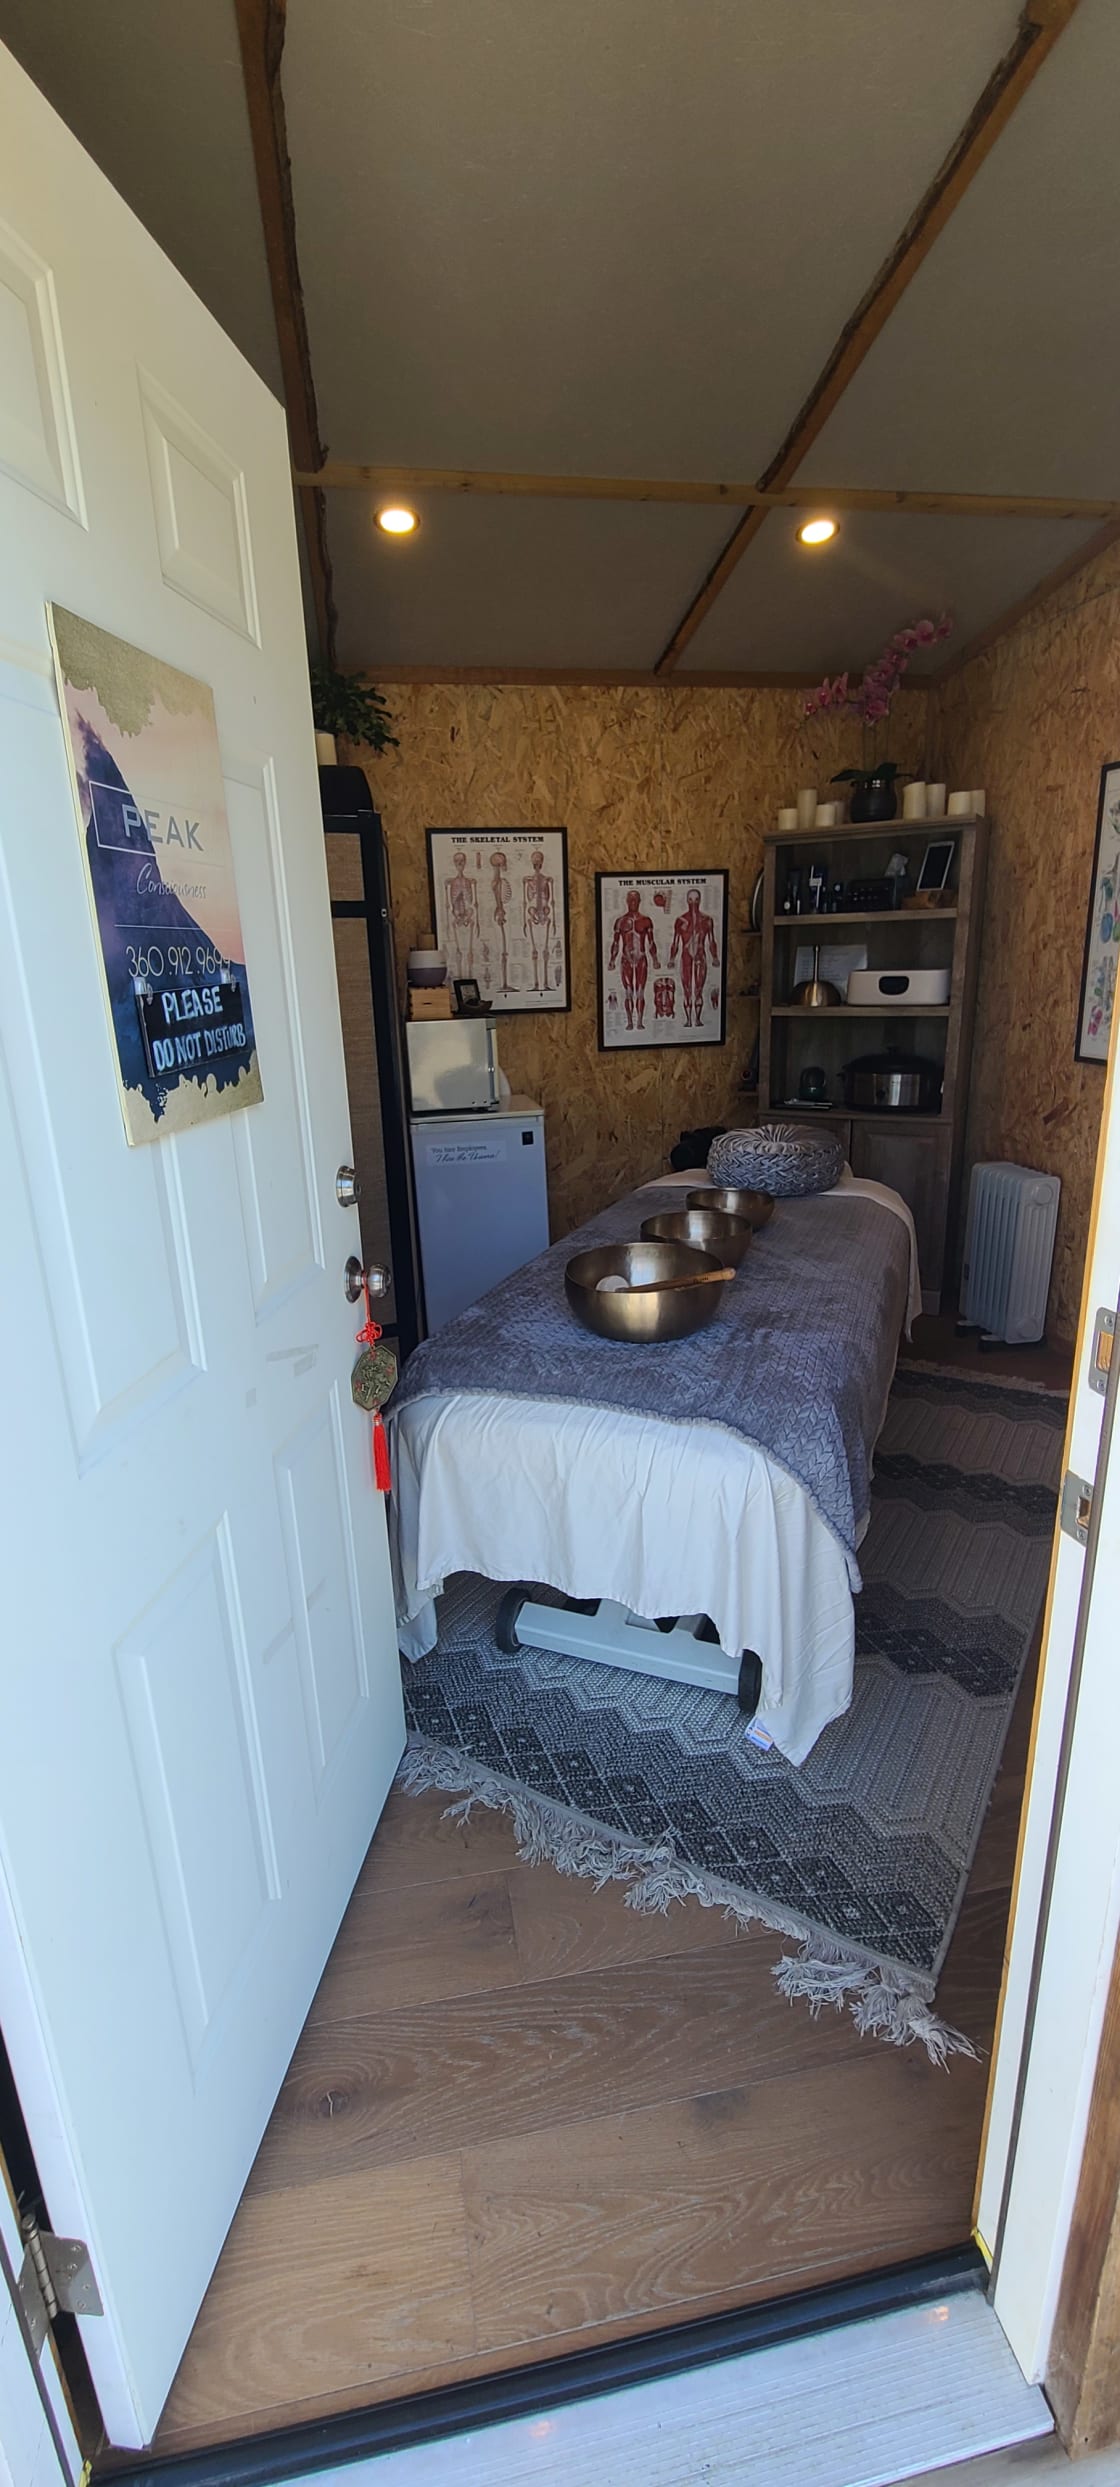 The owner offers a plethora of bodywork on Thursdays and Fridays, just 100 feet away! 

Hike the Parks and then unwind with massage. Check Julia's schedule with the link here https://bit.ly/3sSTVwo 